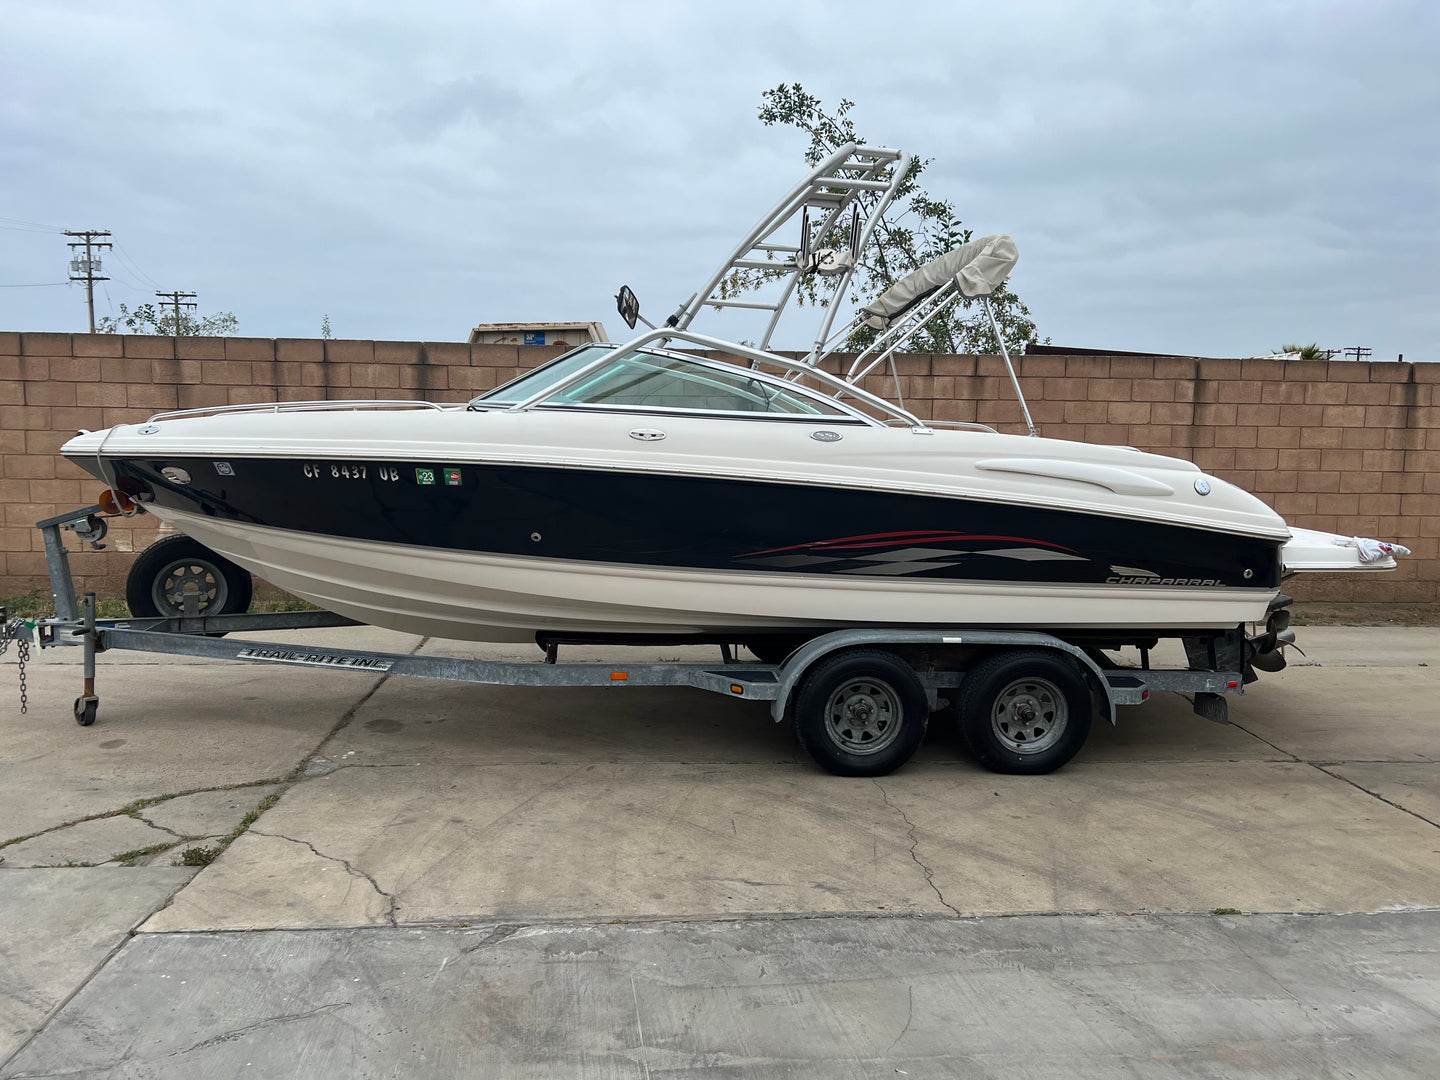 2004 Chaparral 220 SSi (SOLD)